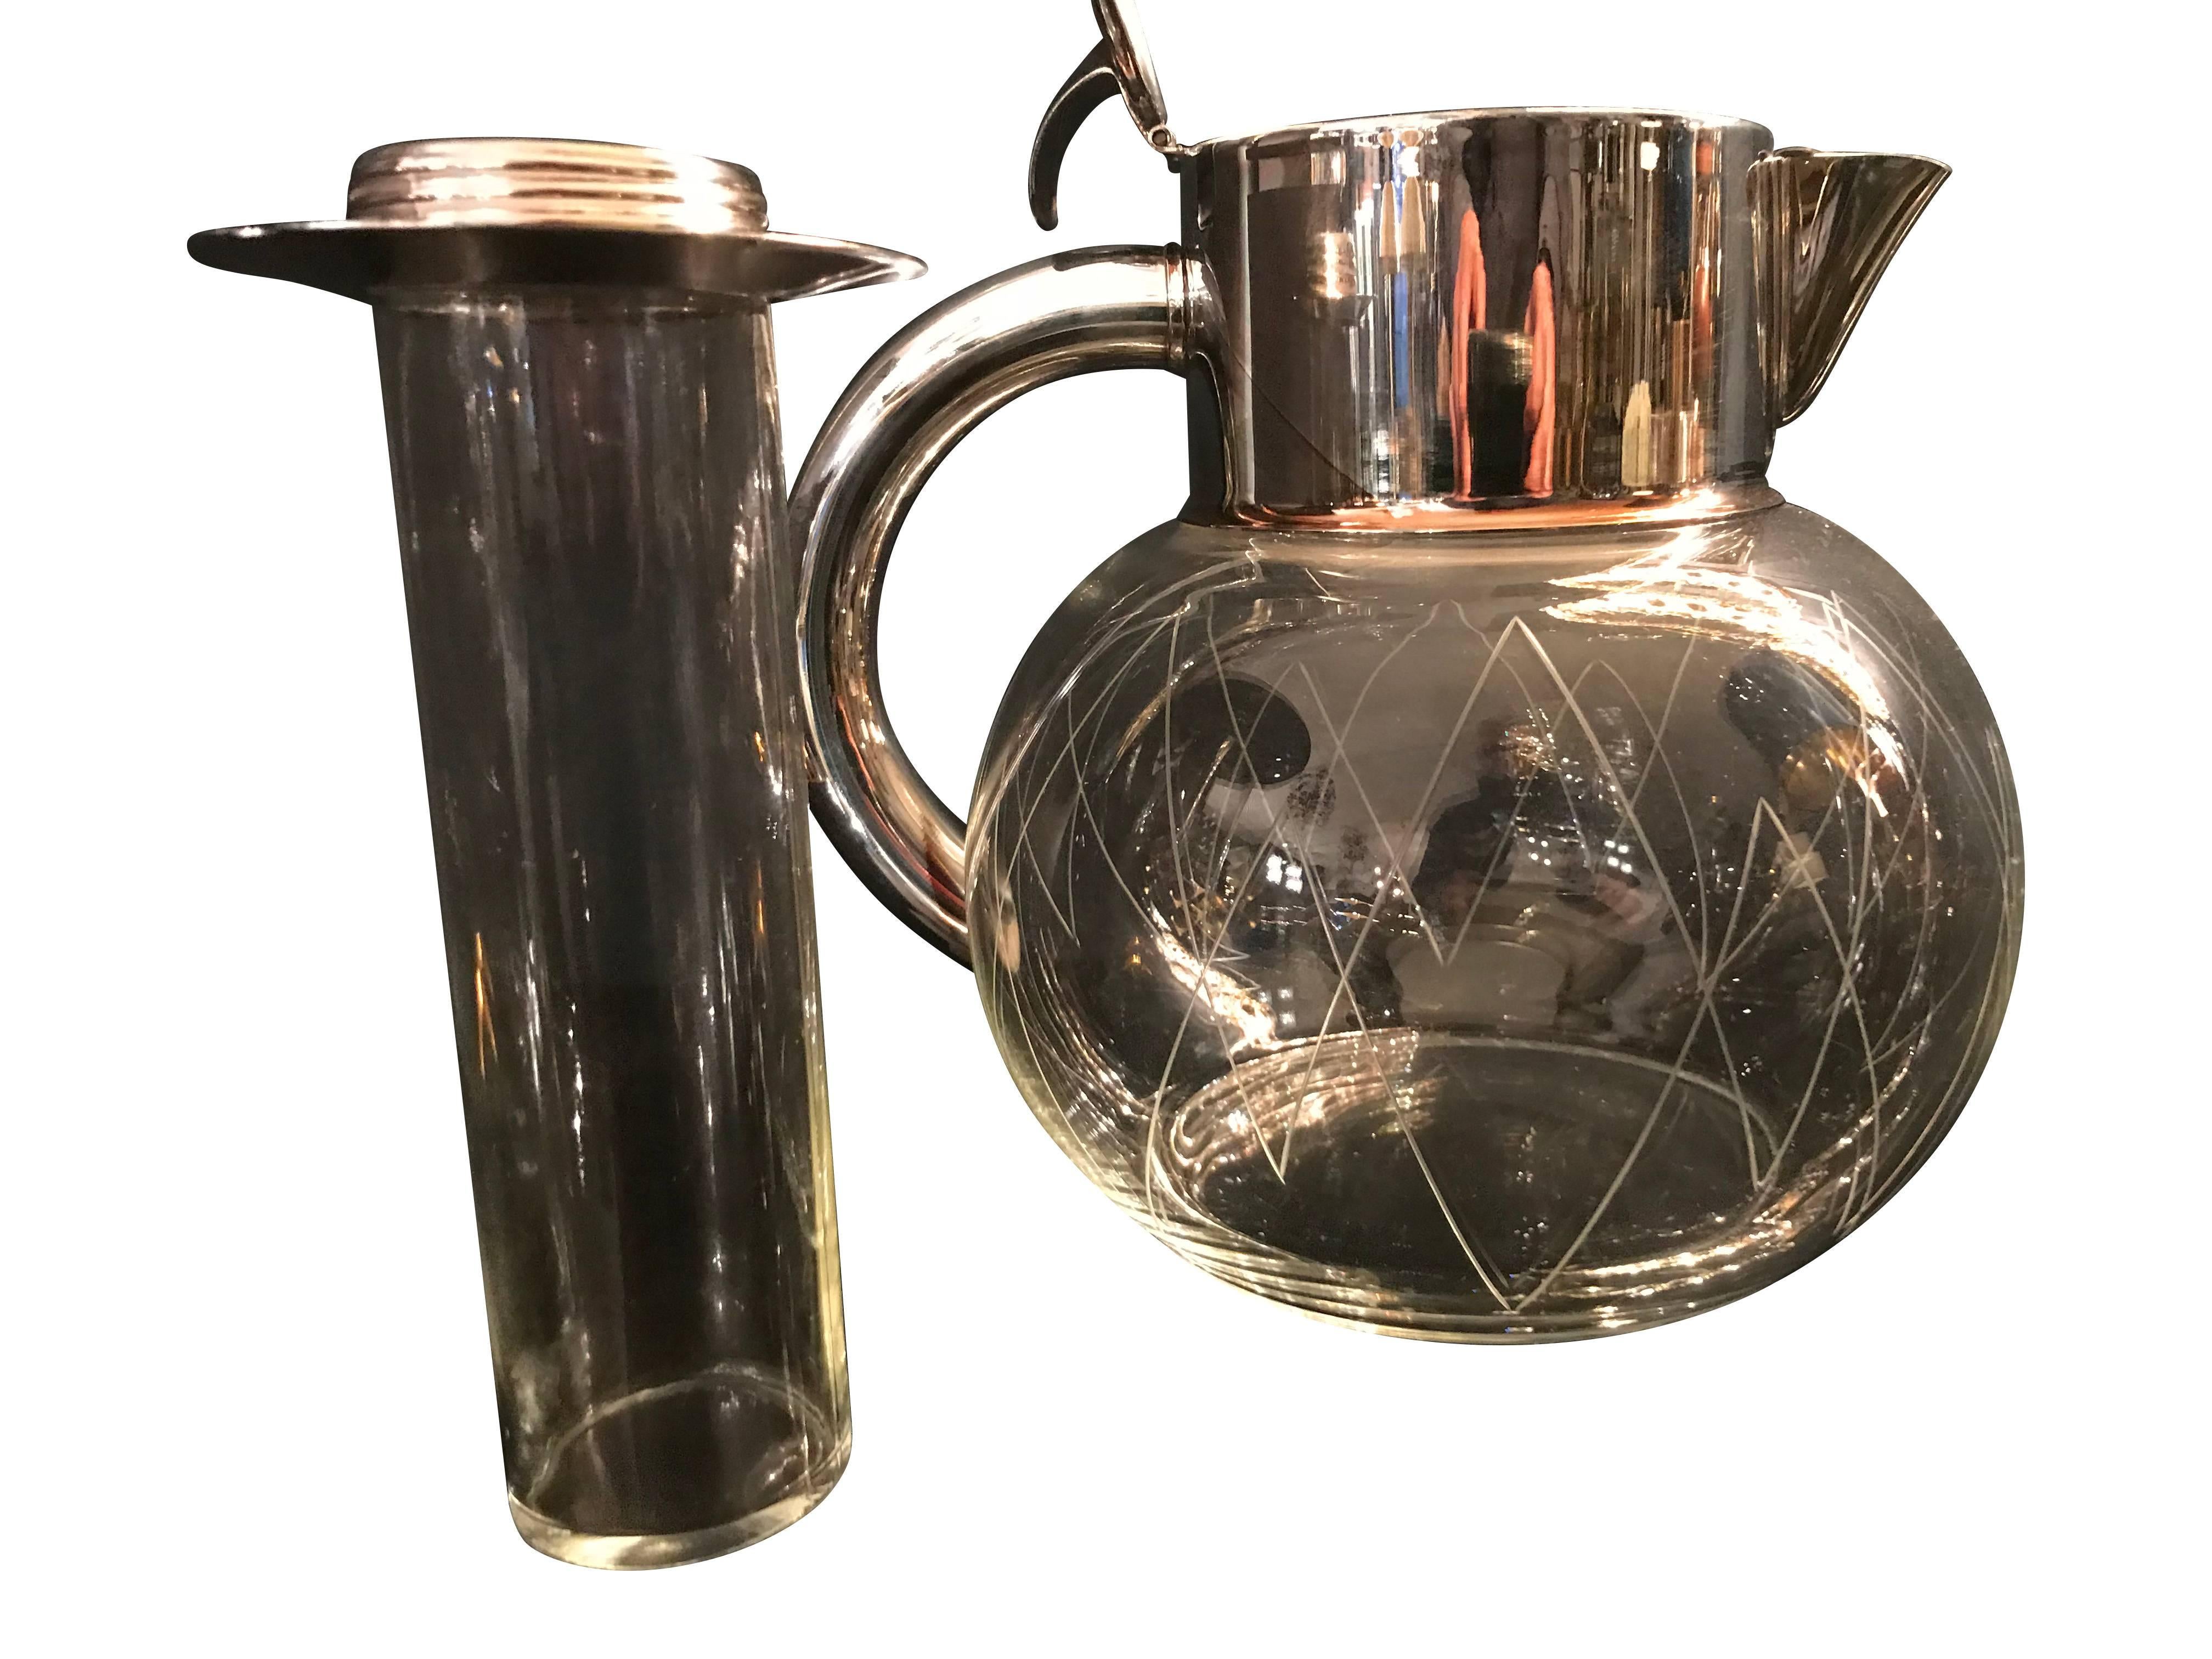 A glass cocktail jug with silver plated handles, lid and strainer. The lid opens to reveal a central glass column to put ice in, which won’t dilute the cocktail or drink in the jug, but keep it iced. The glass bowl is hand cut with geometric lines.